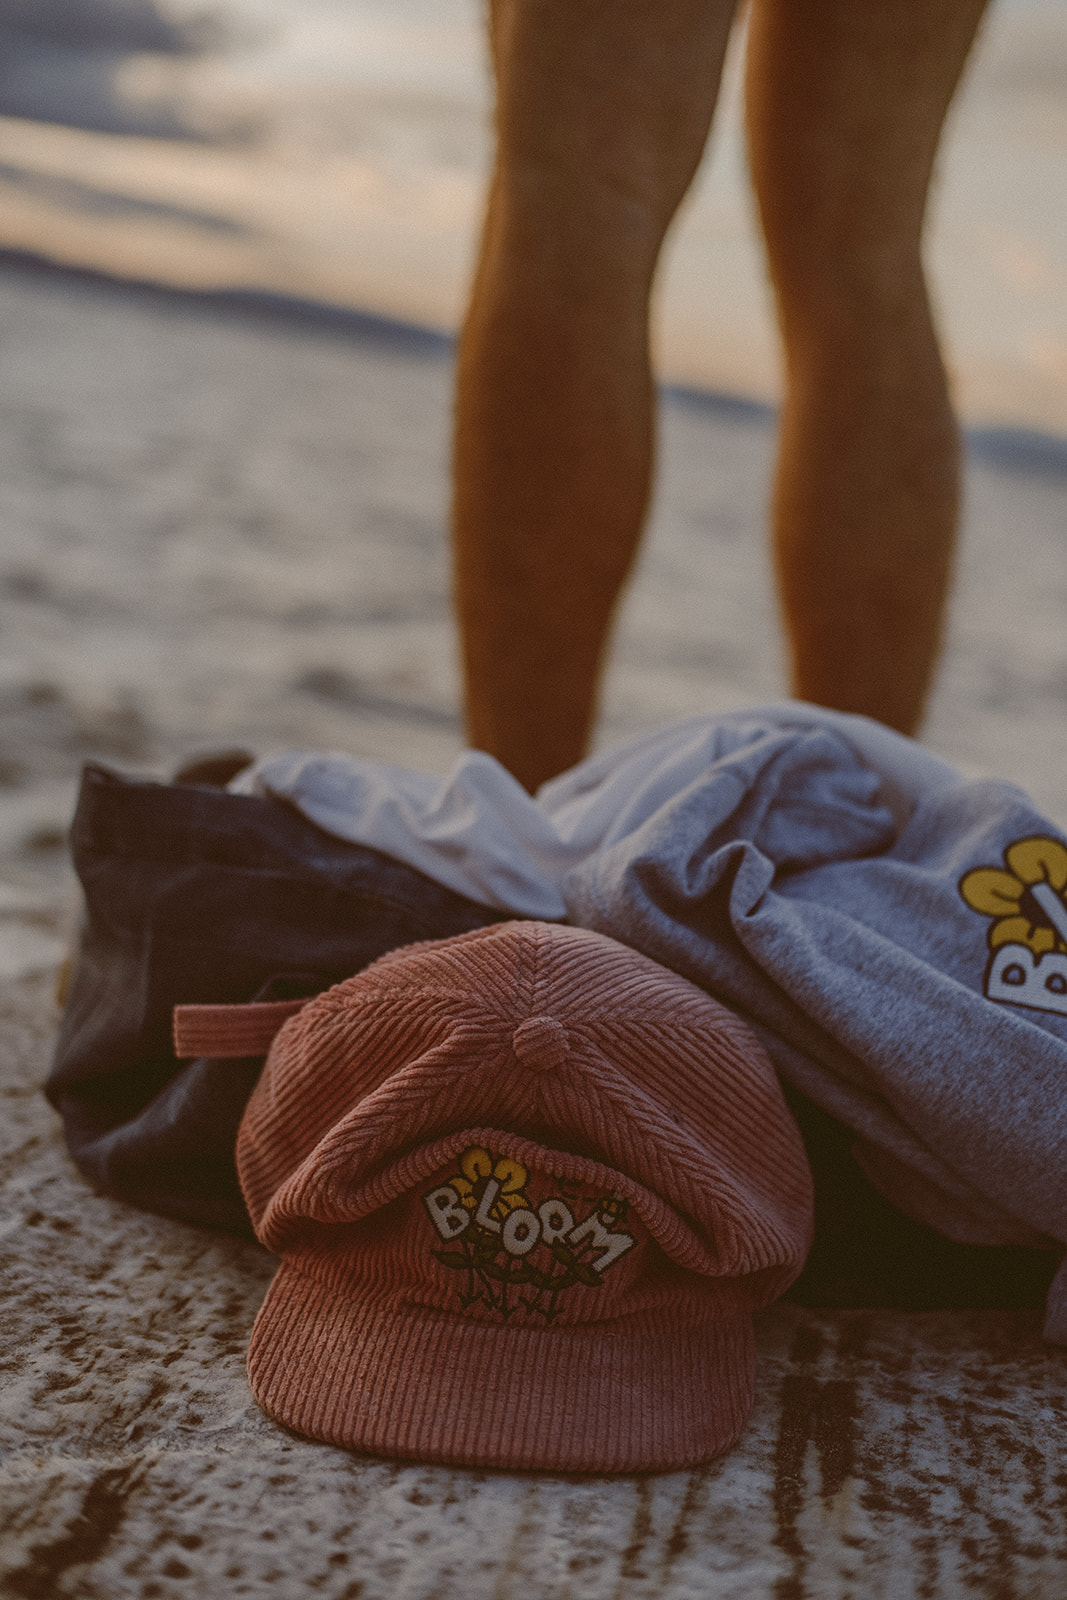 Pink corduroy hat with "BLOOM" logo sitting in front of a pile of clothes with a mans bare legs in the background.